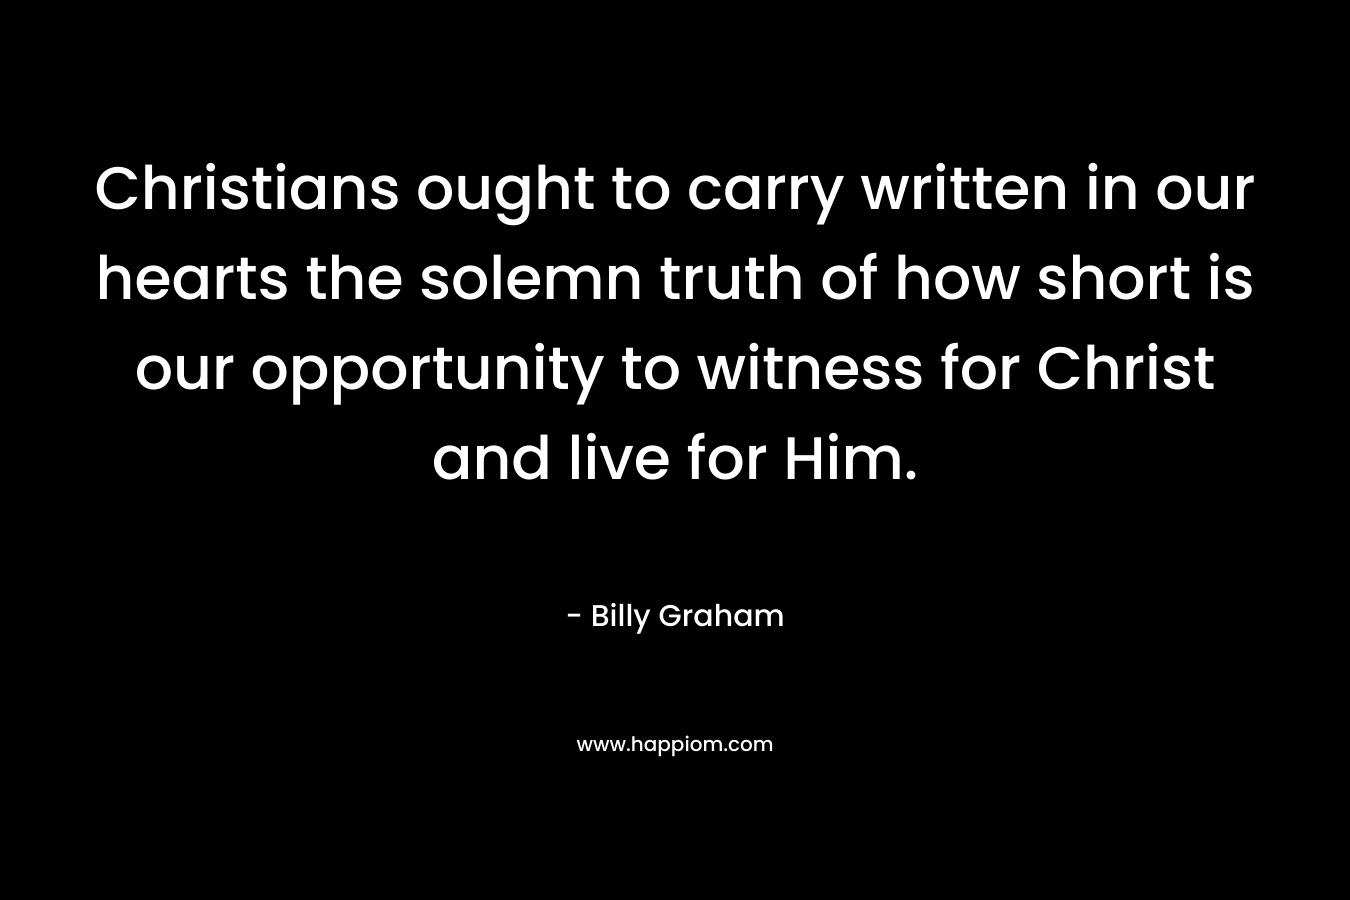 Christians ought to carry written in our hearts the solemn truth of how short is our opportunity to witness for Christ and live for Him. – Billy Graham